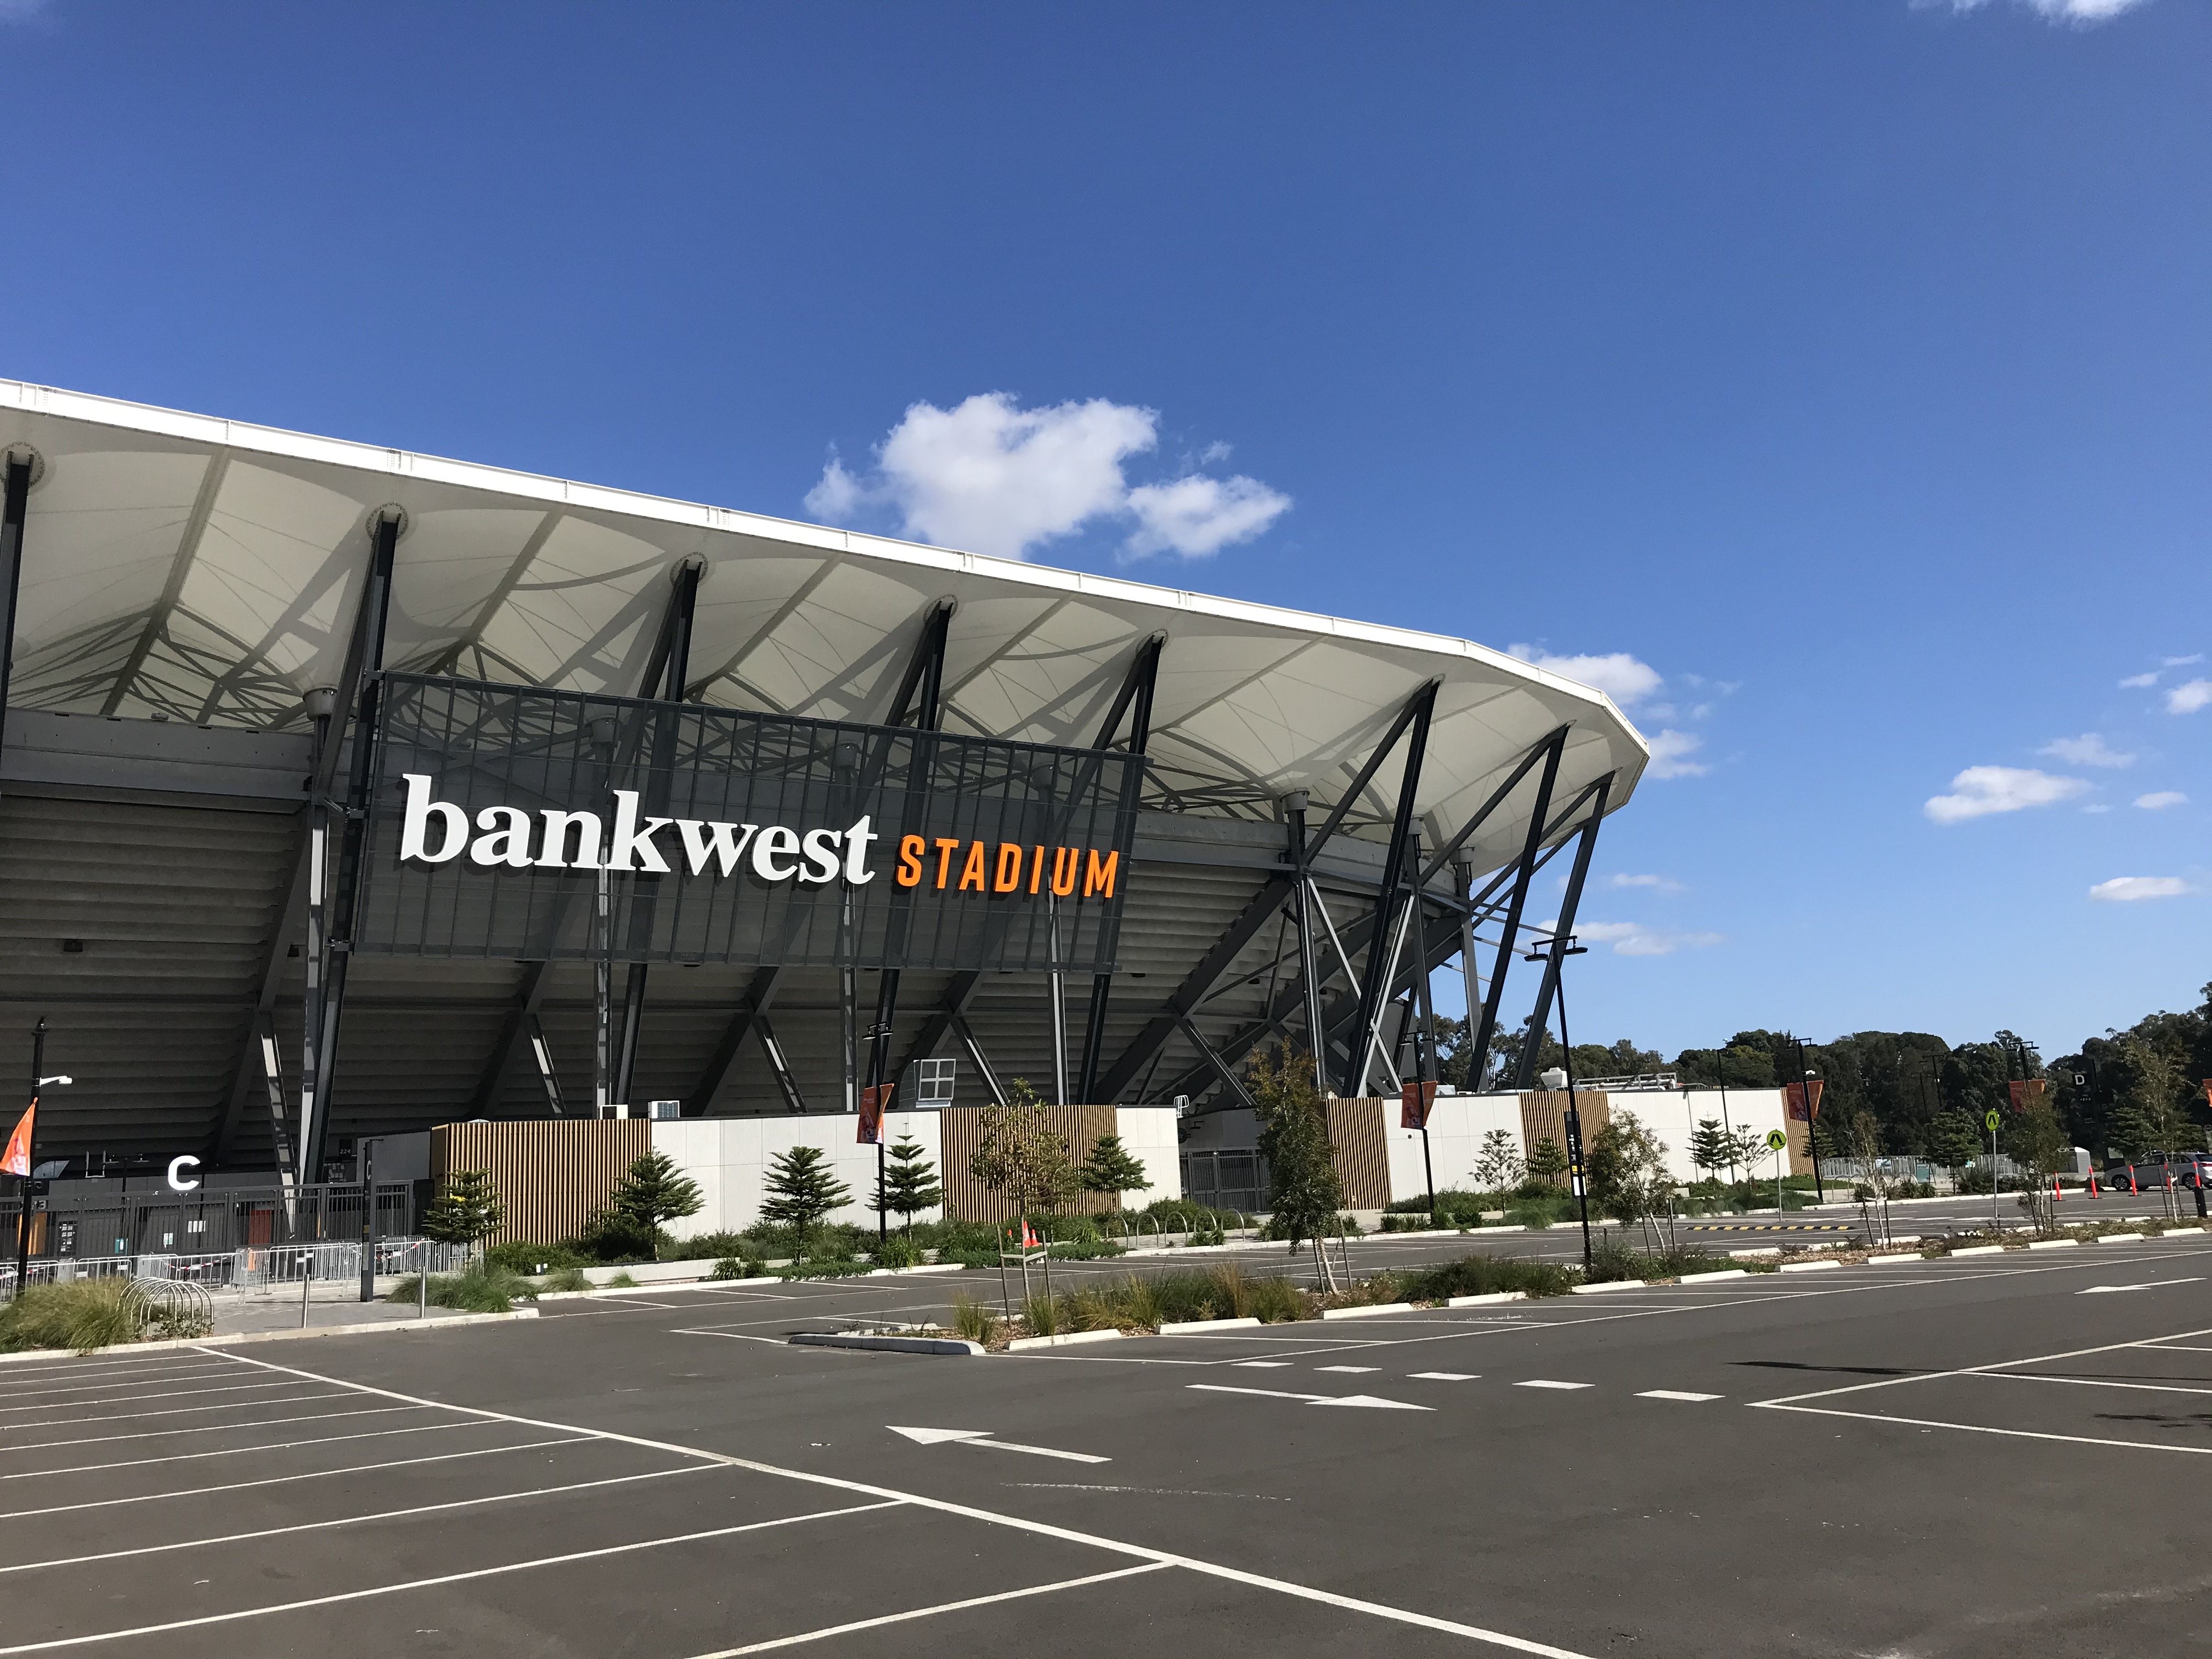 On the other side of the planet, HUB Parking Australia is supporting the Bankwest Stadium in NSW to achieve fast traffic management, even during busy events, thanks to a ticketed LPR solution and VMS panels that provide customized messages. 